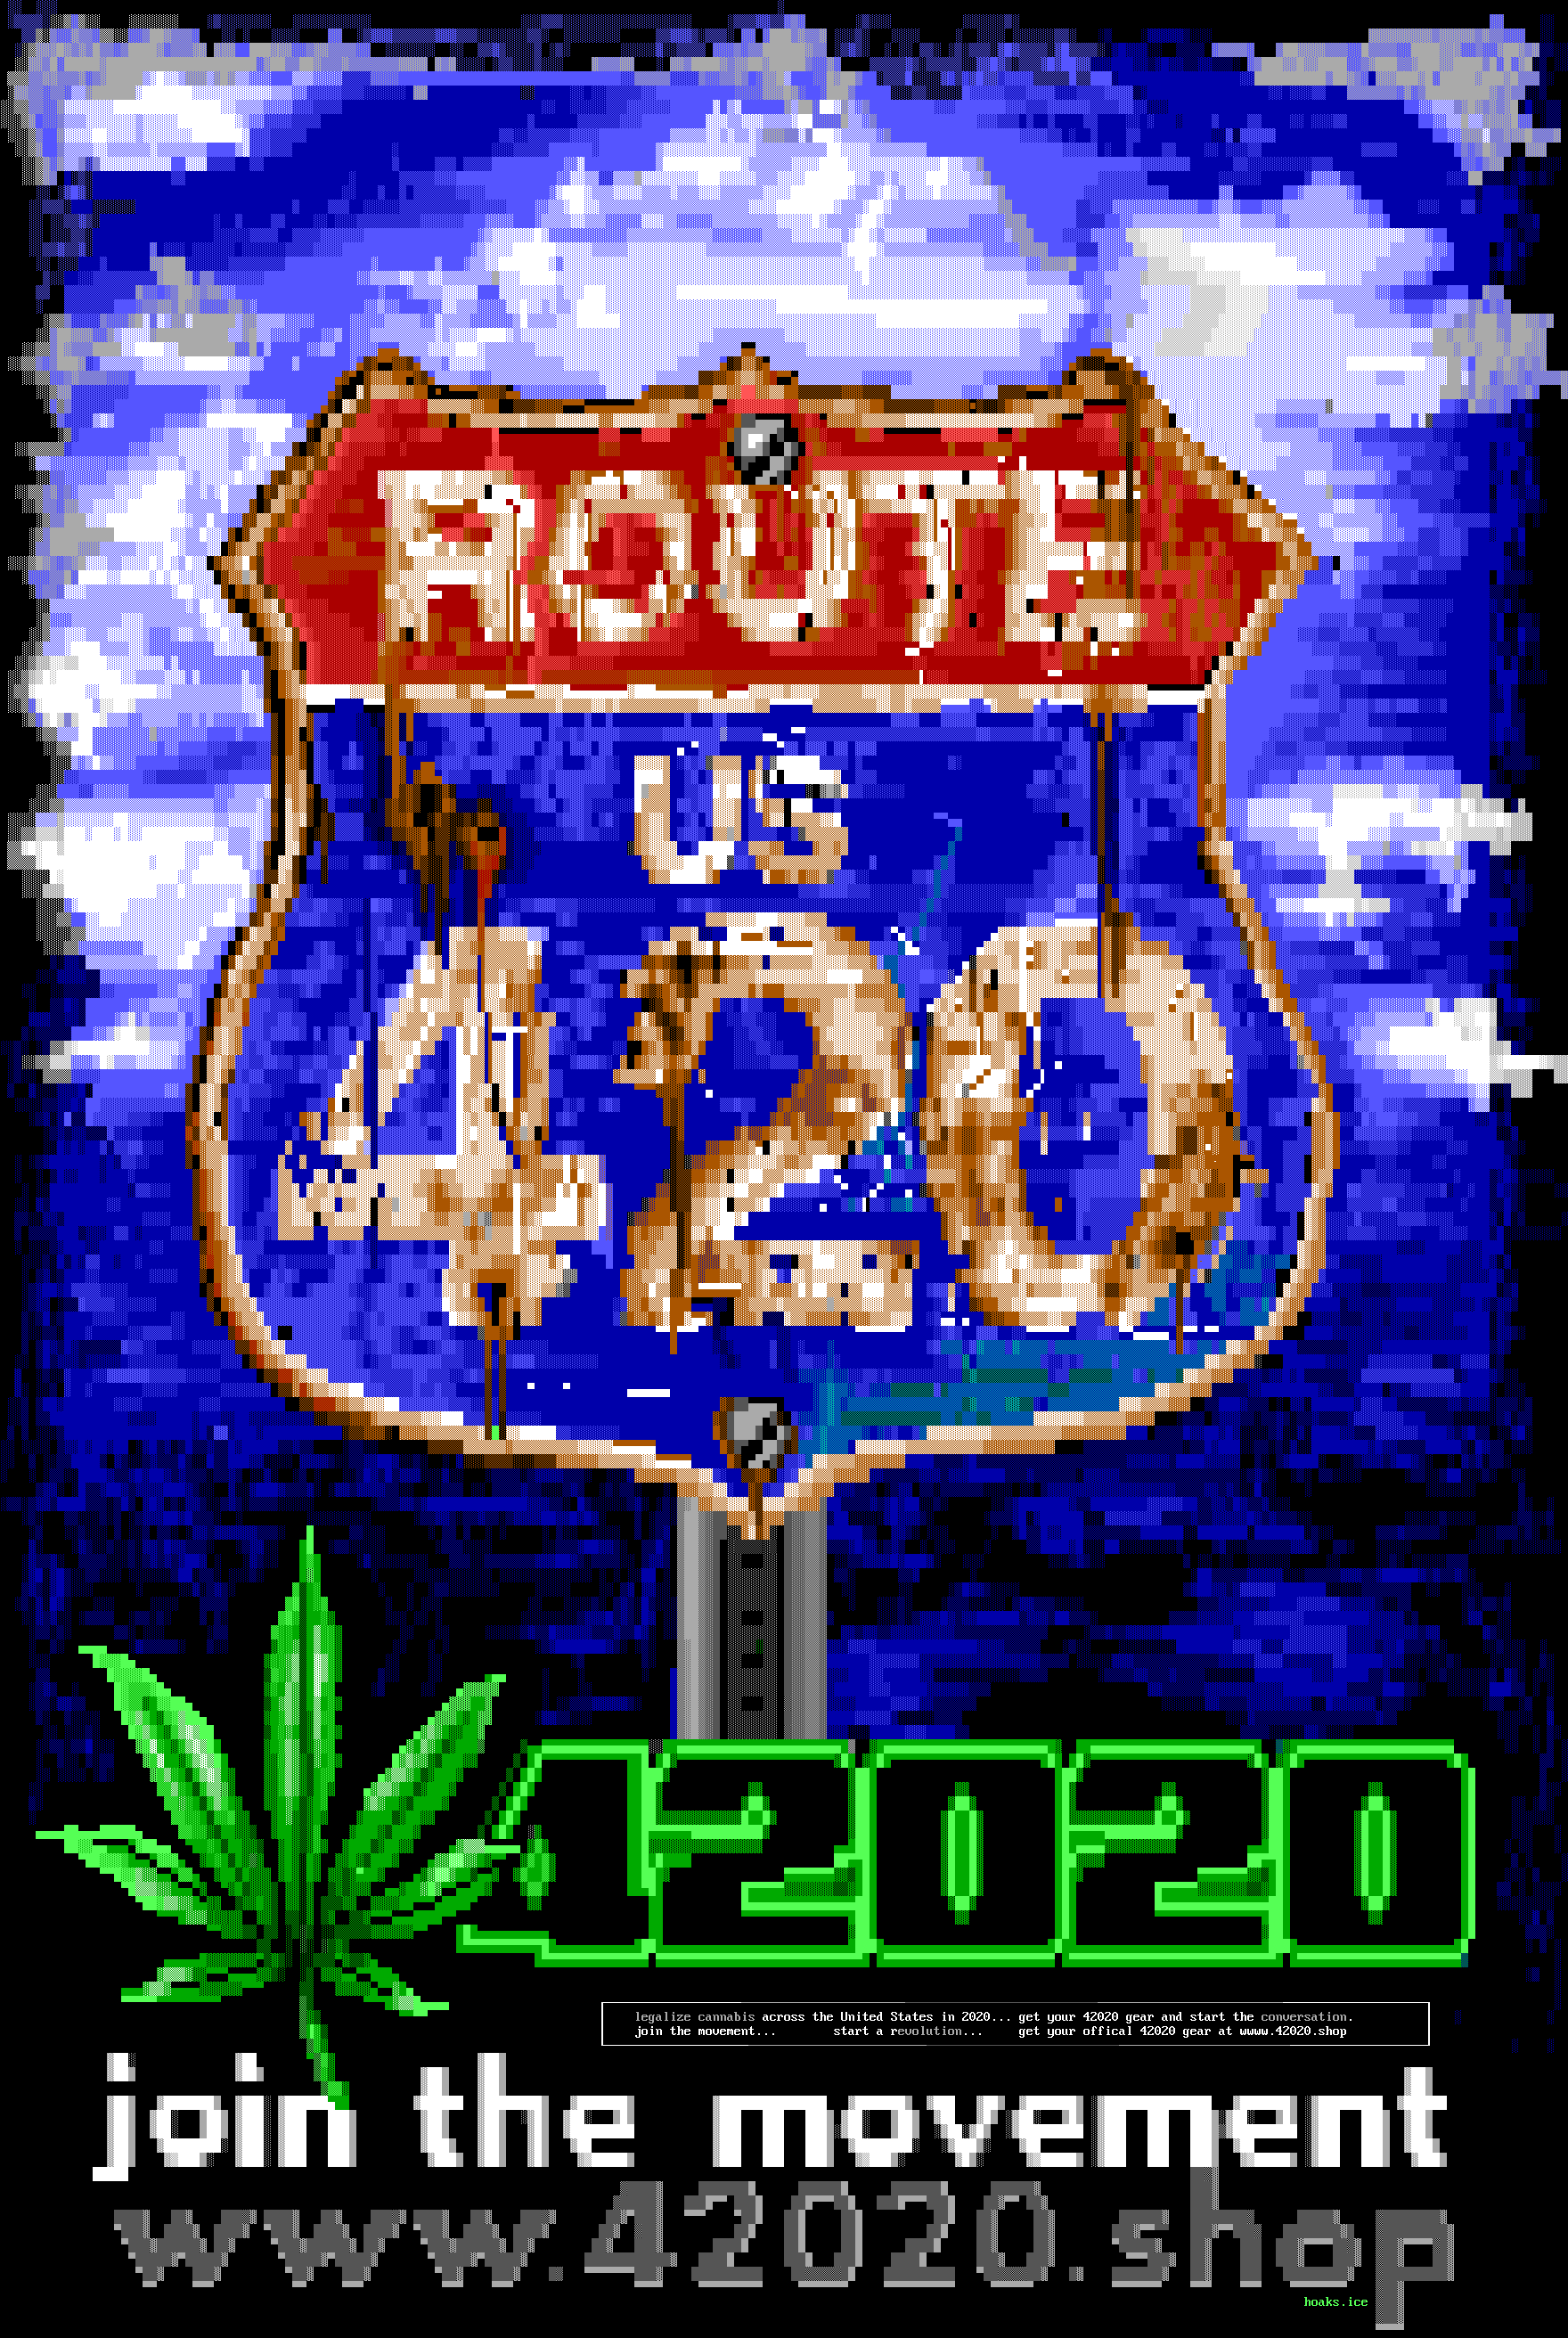 Route 42020 by Hoaks